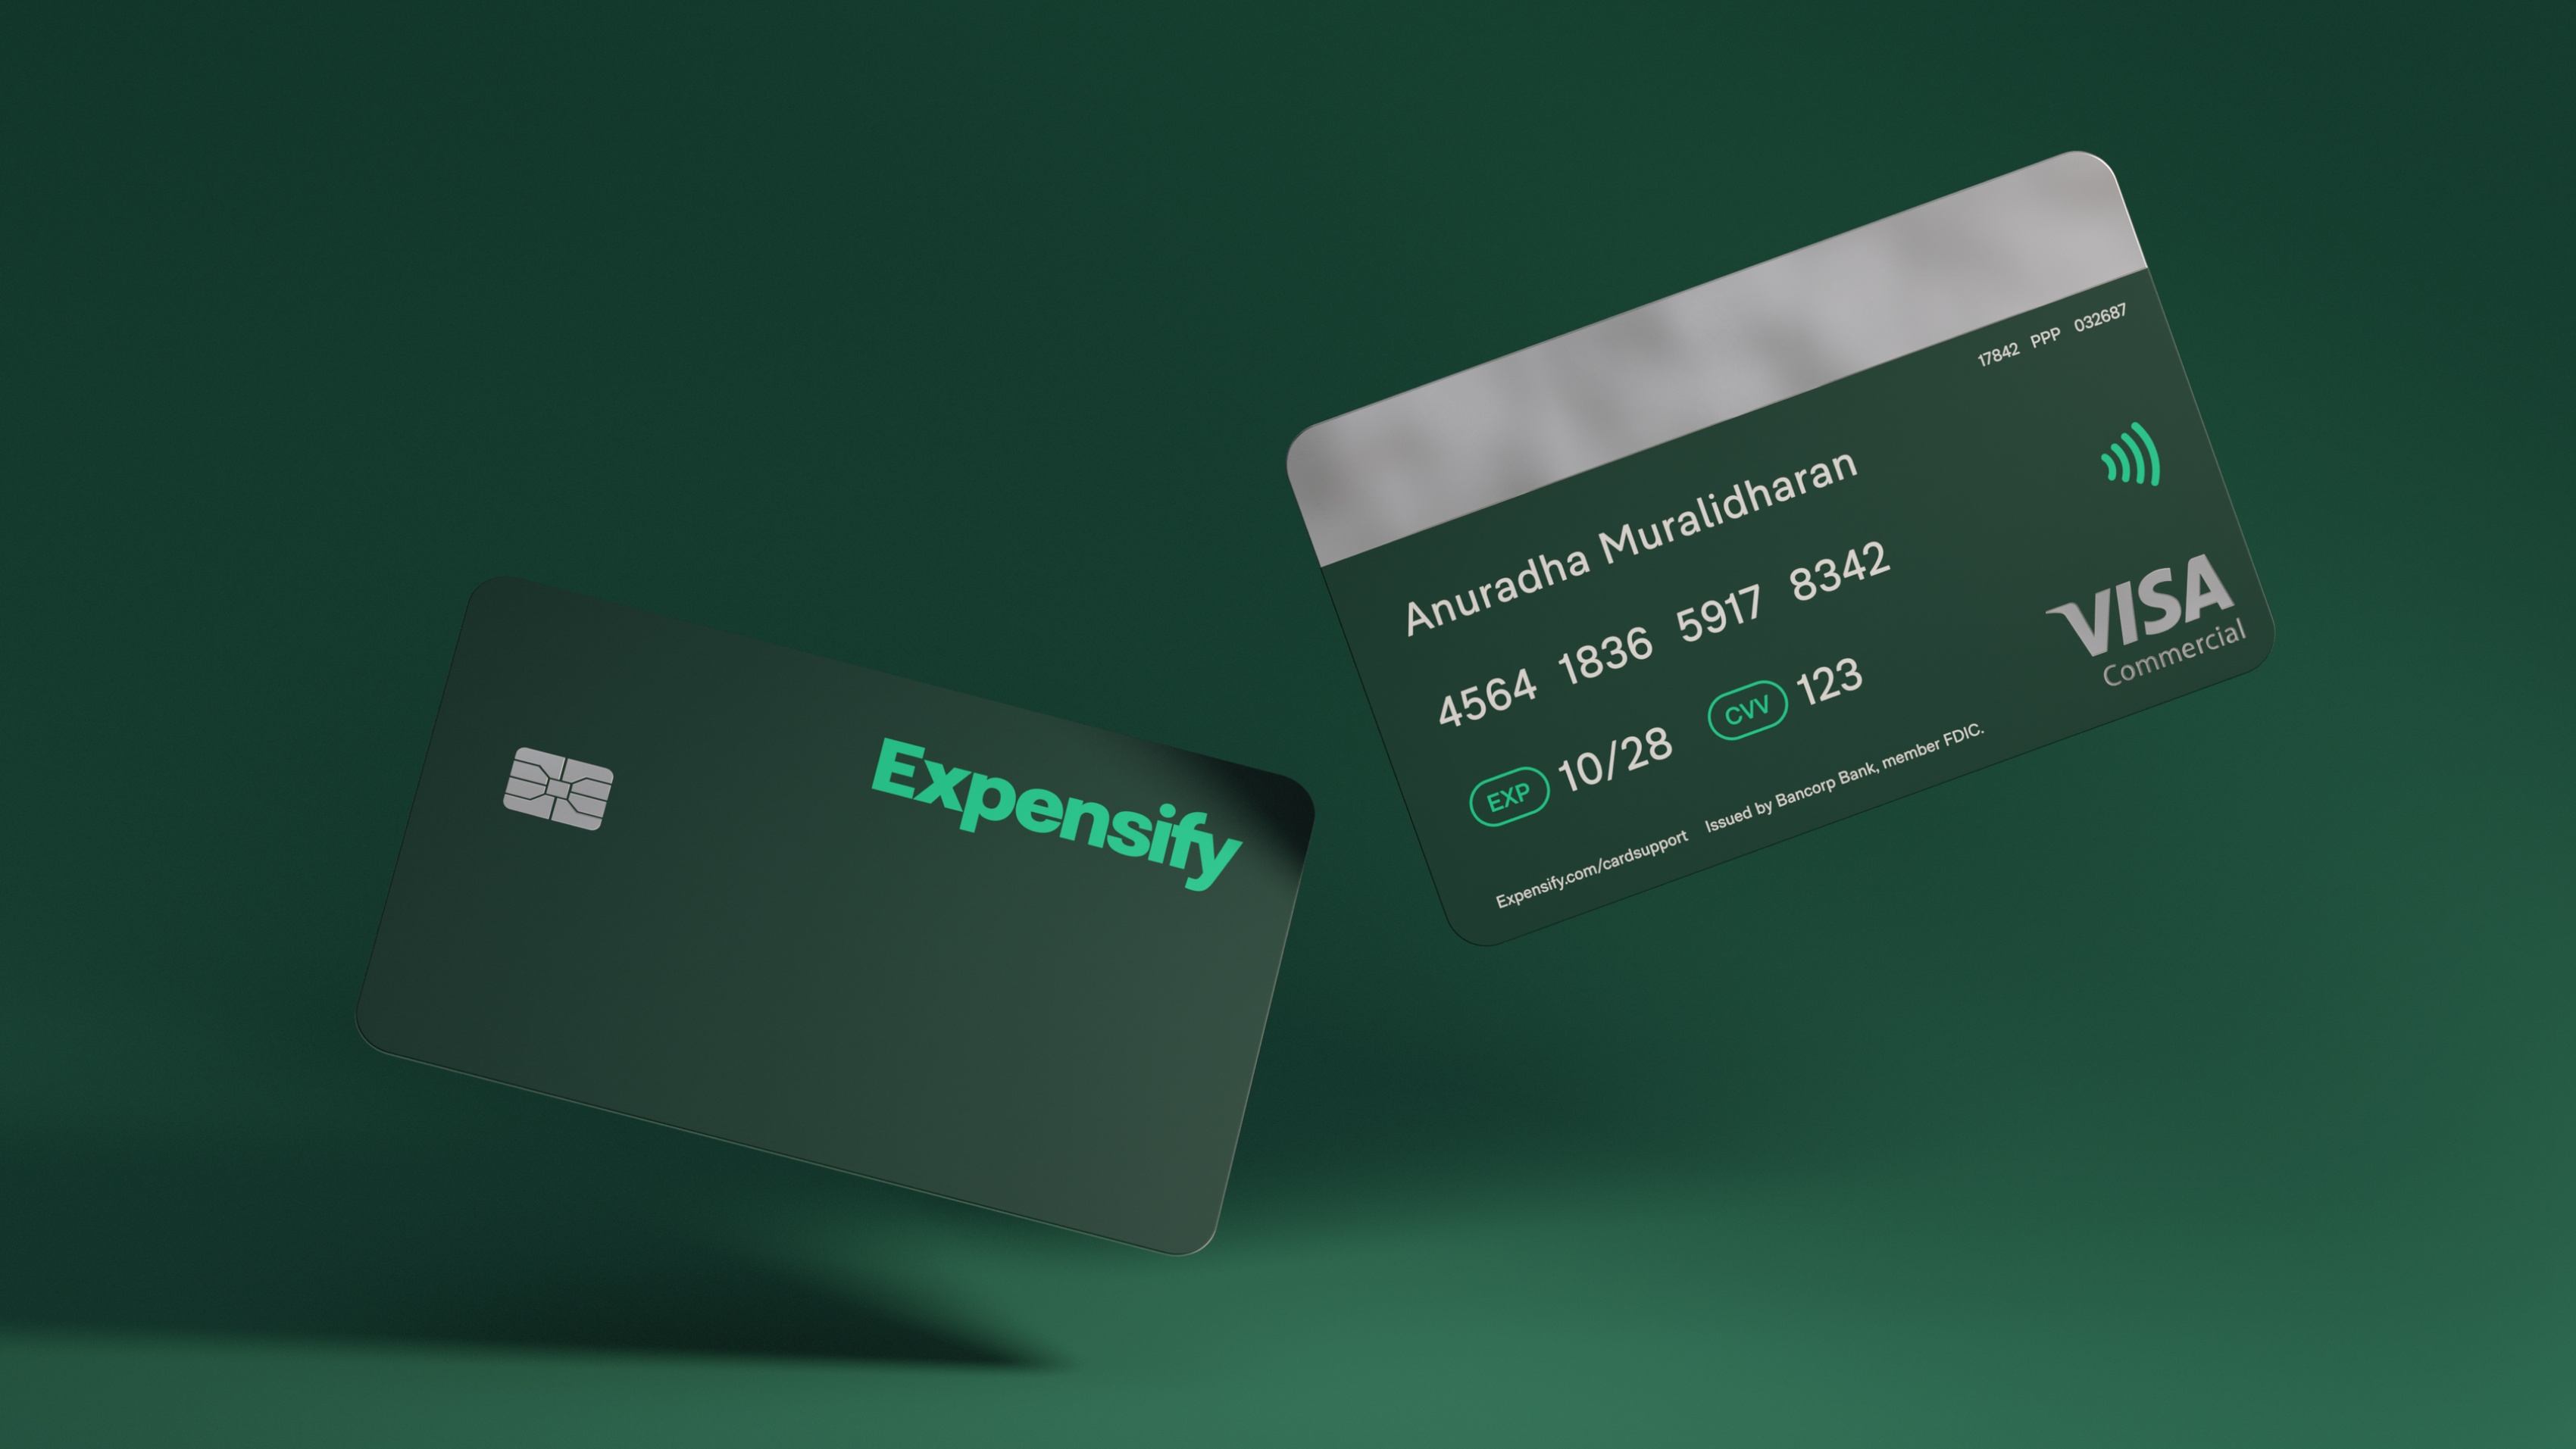 A green credit card with Expensify branding on it.